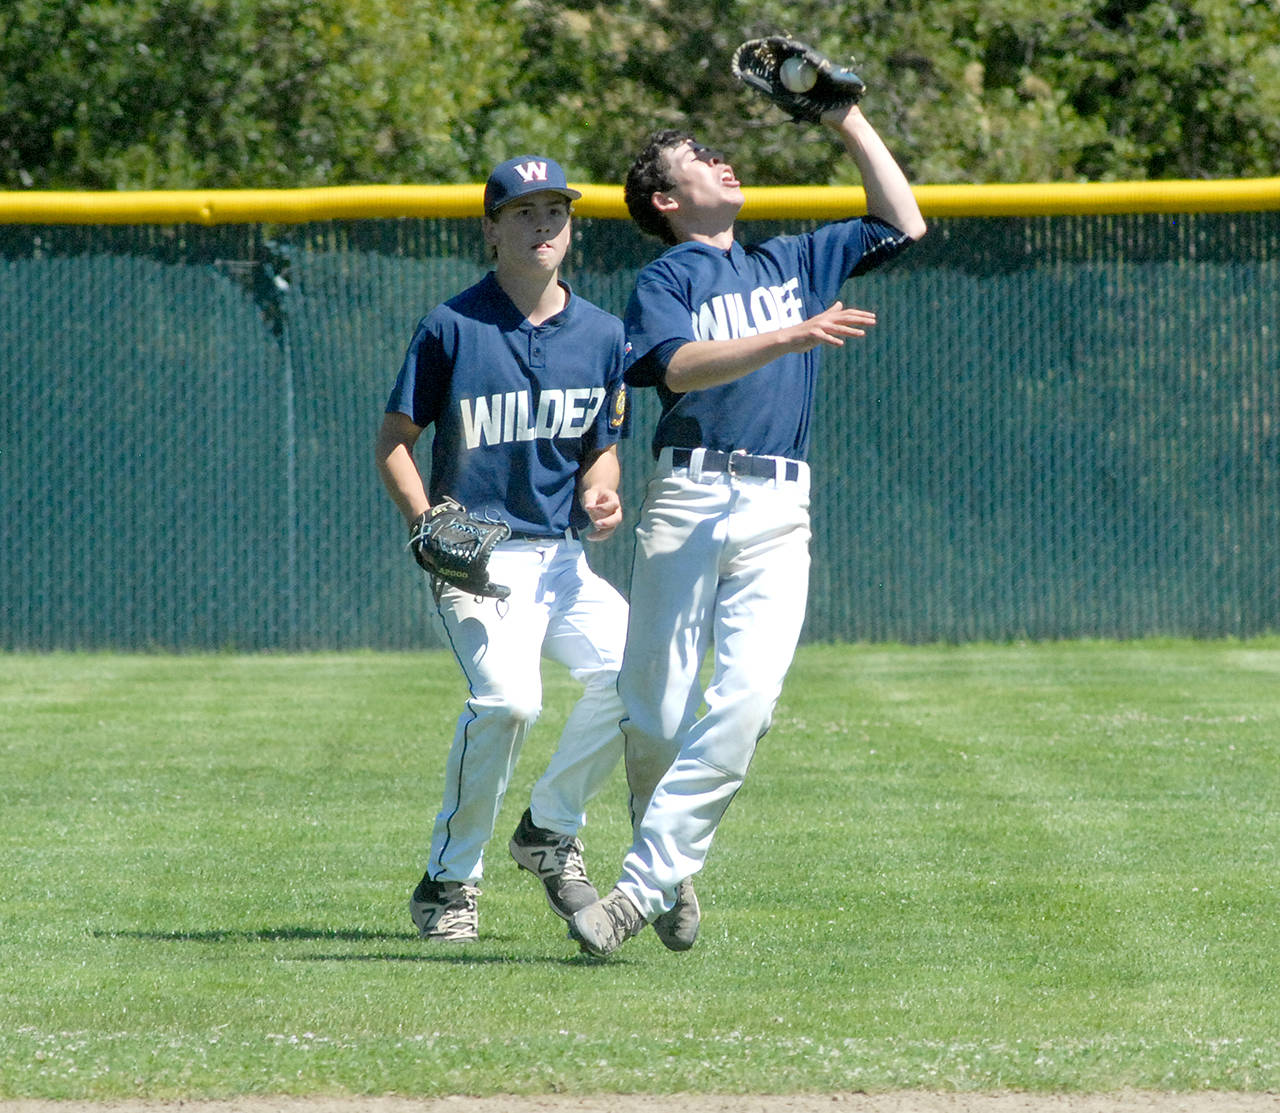 Keith Thorpe/Peninsula Daily News Wilder second baseman Michael Grubb, right, drops back to catch a fly ball while center fielder Timmy Adams backs him up during a game against Lower Columbia.